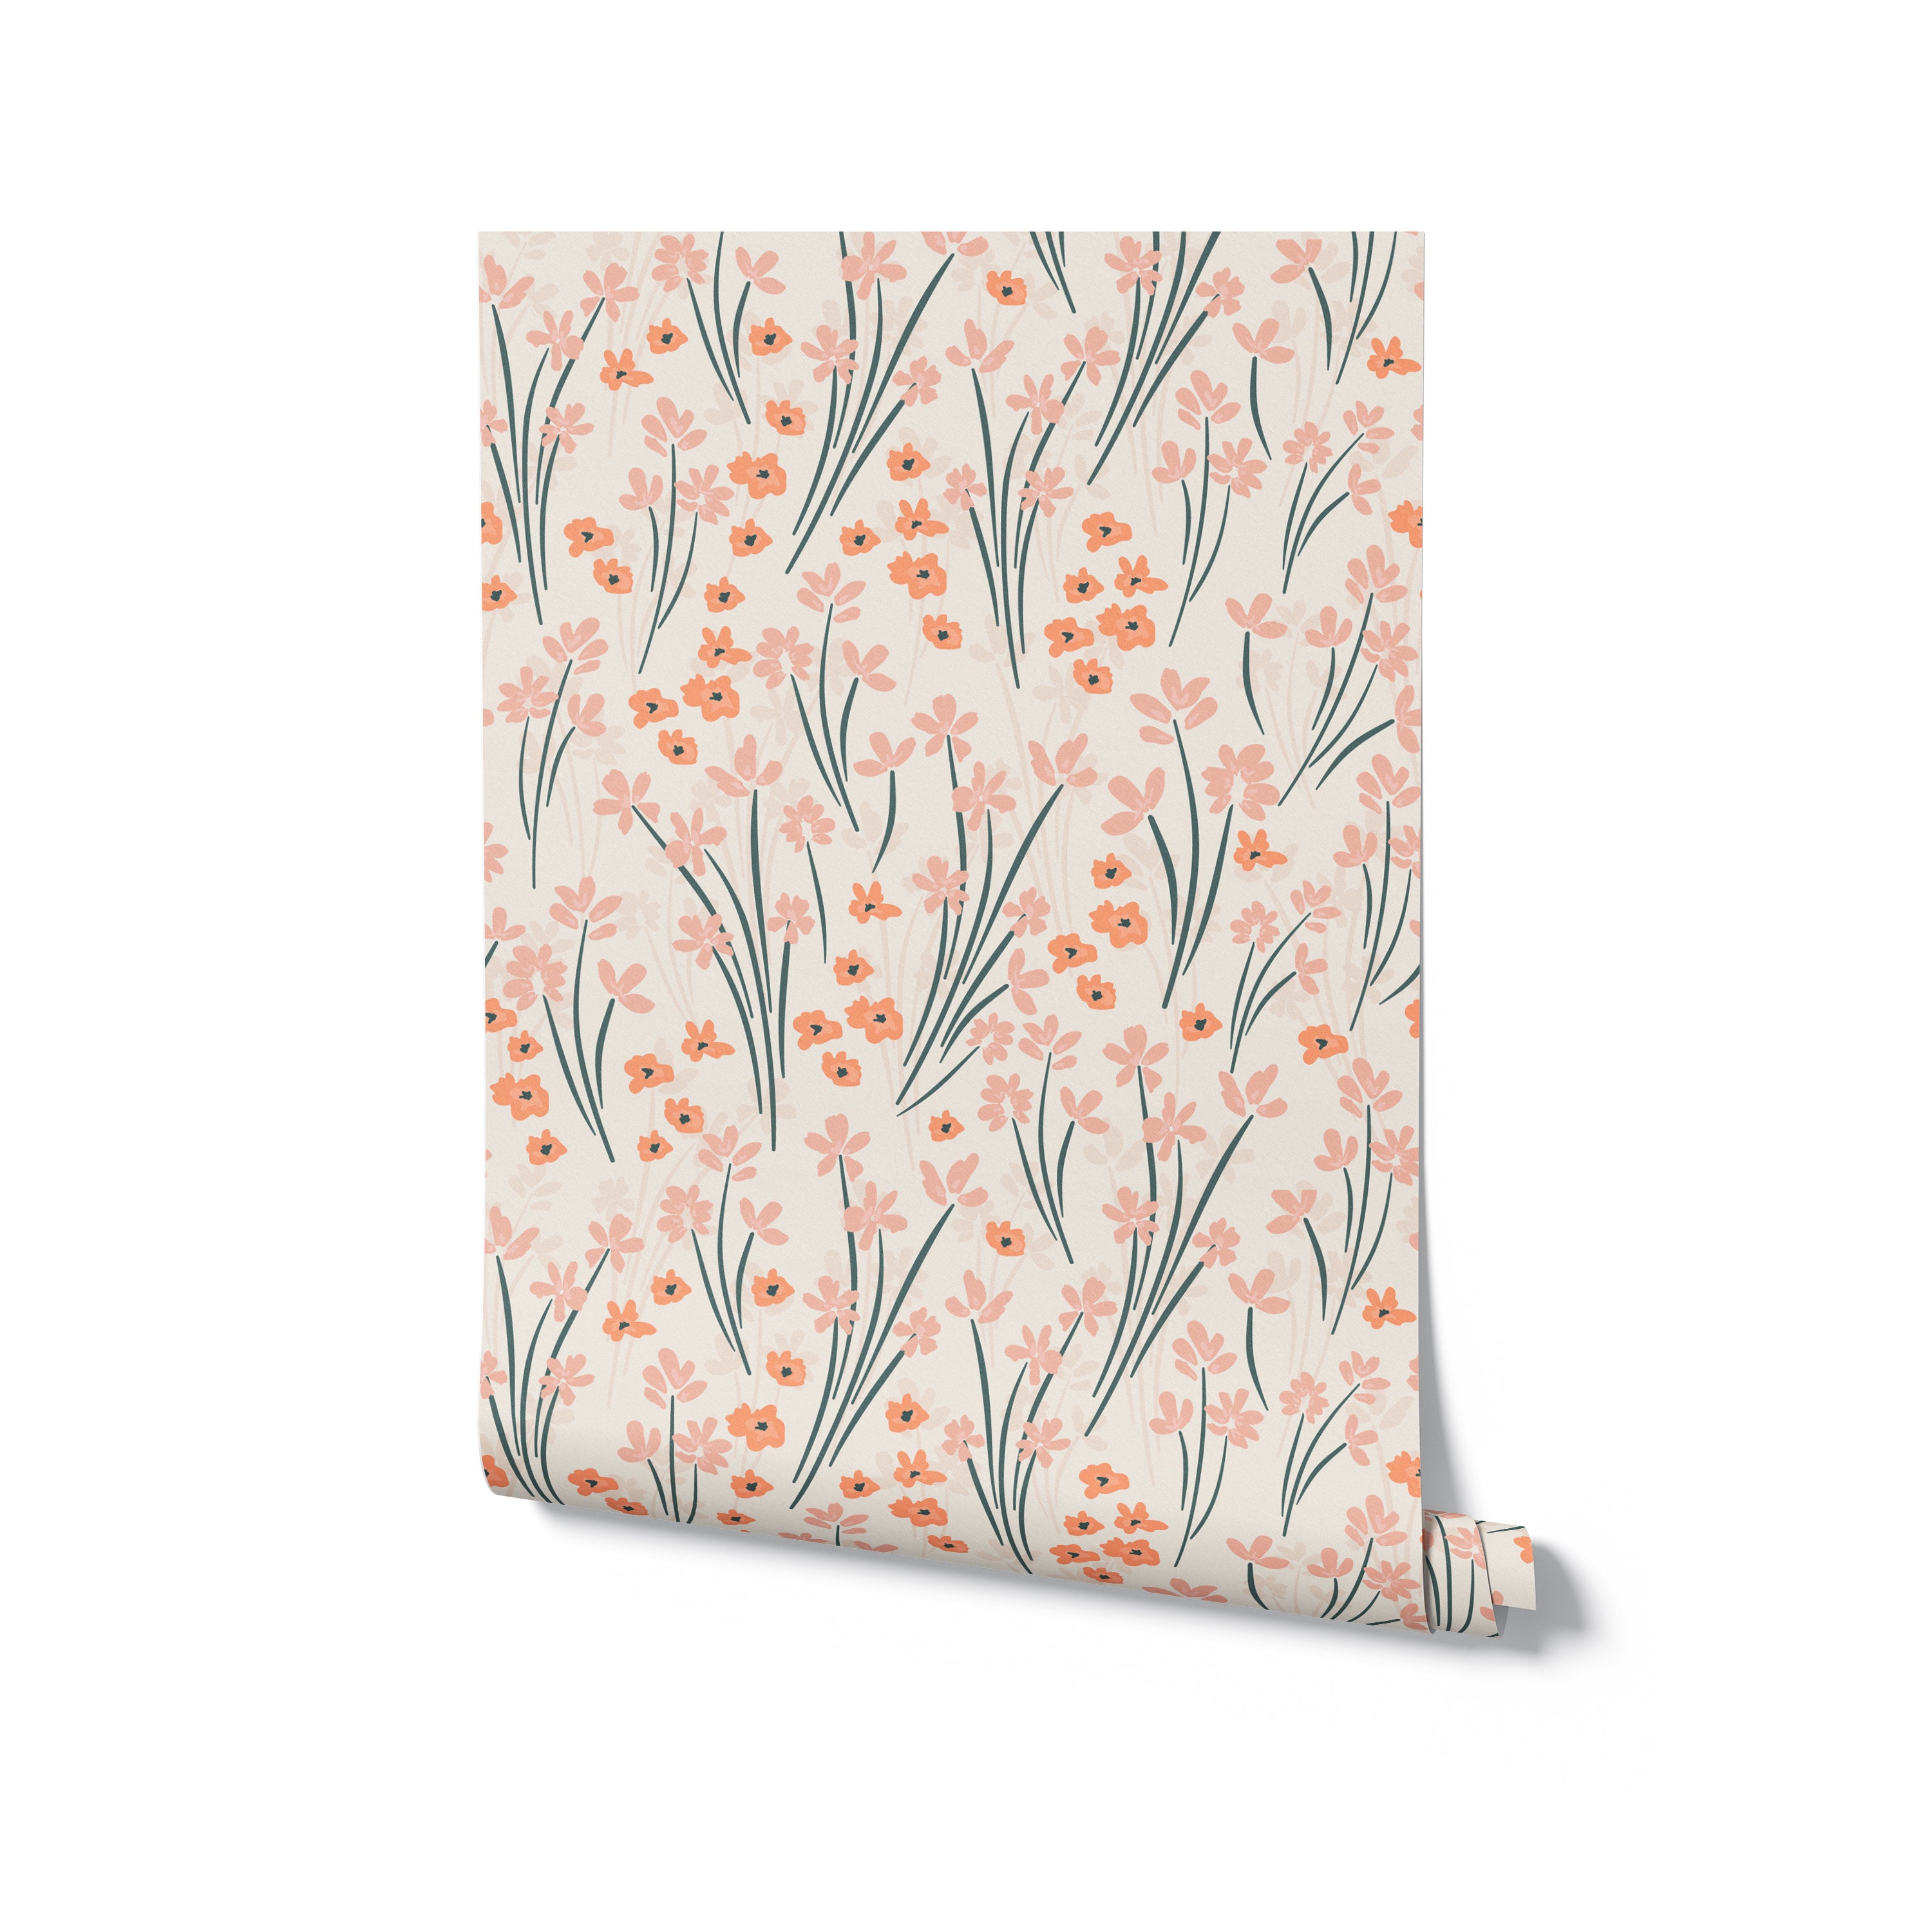 A single roll of wallpaper is presented, showcasing the St Valentine floral pattern with orange and pink flowers on a soft beige background. The roll is positioned to show the continuous flow of the design, indicative of how it will look when applied to a wall.